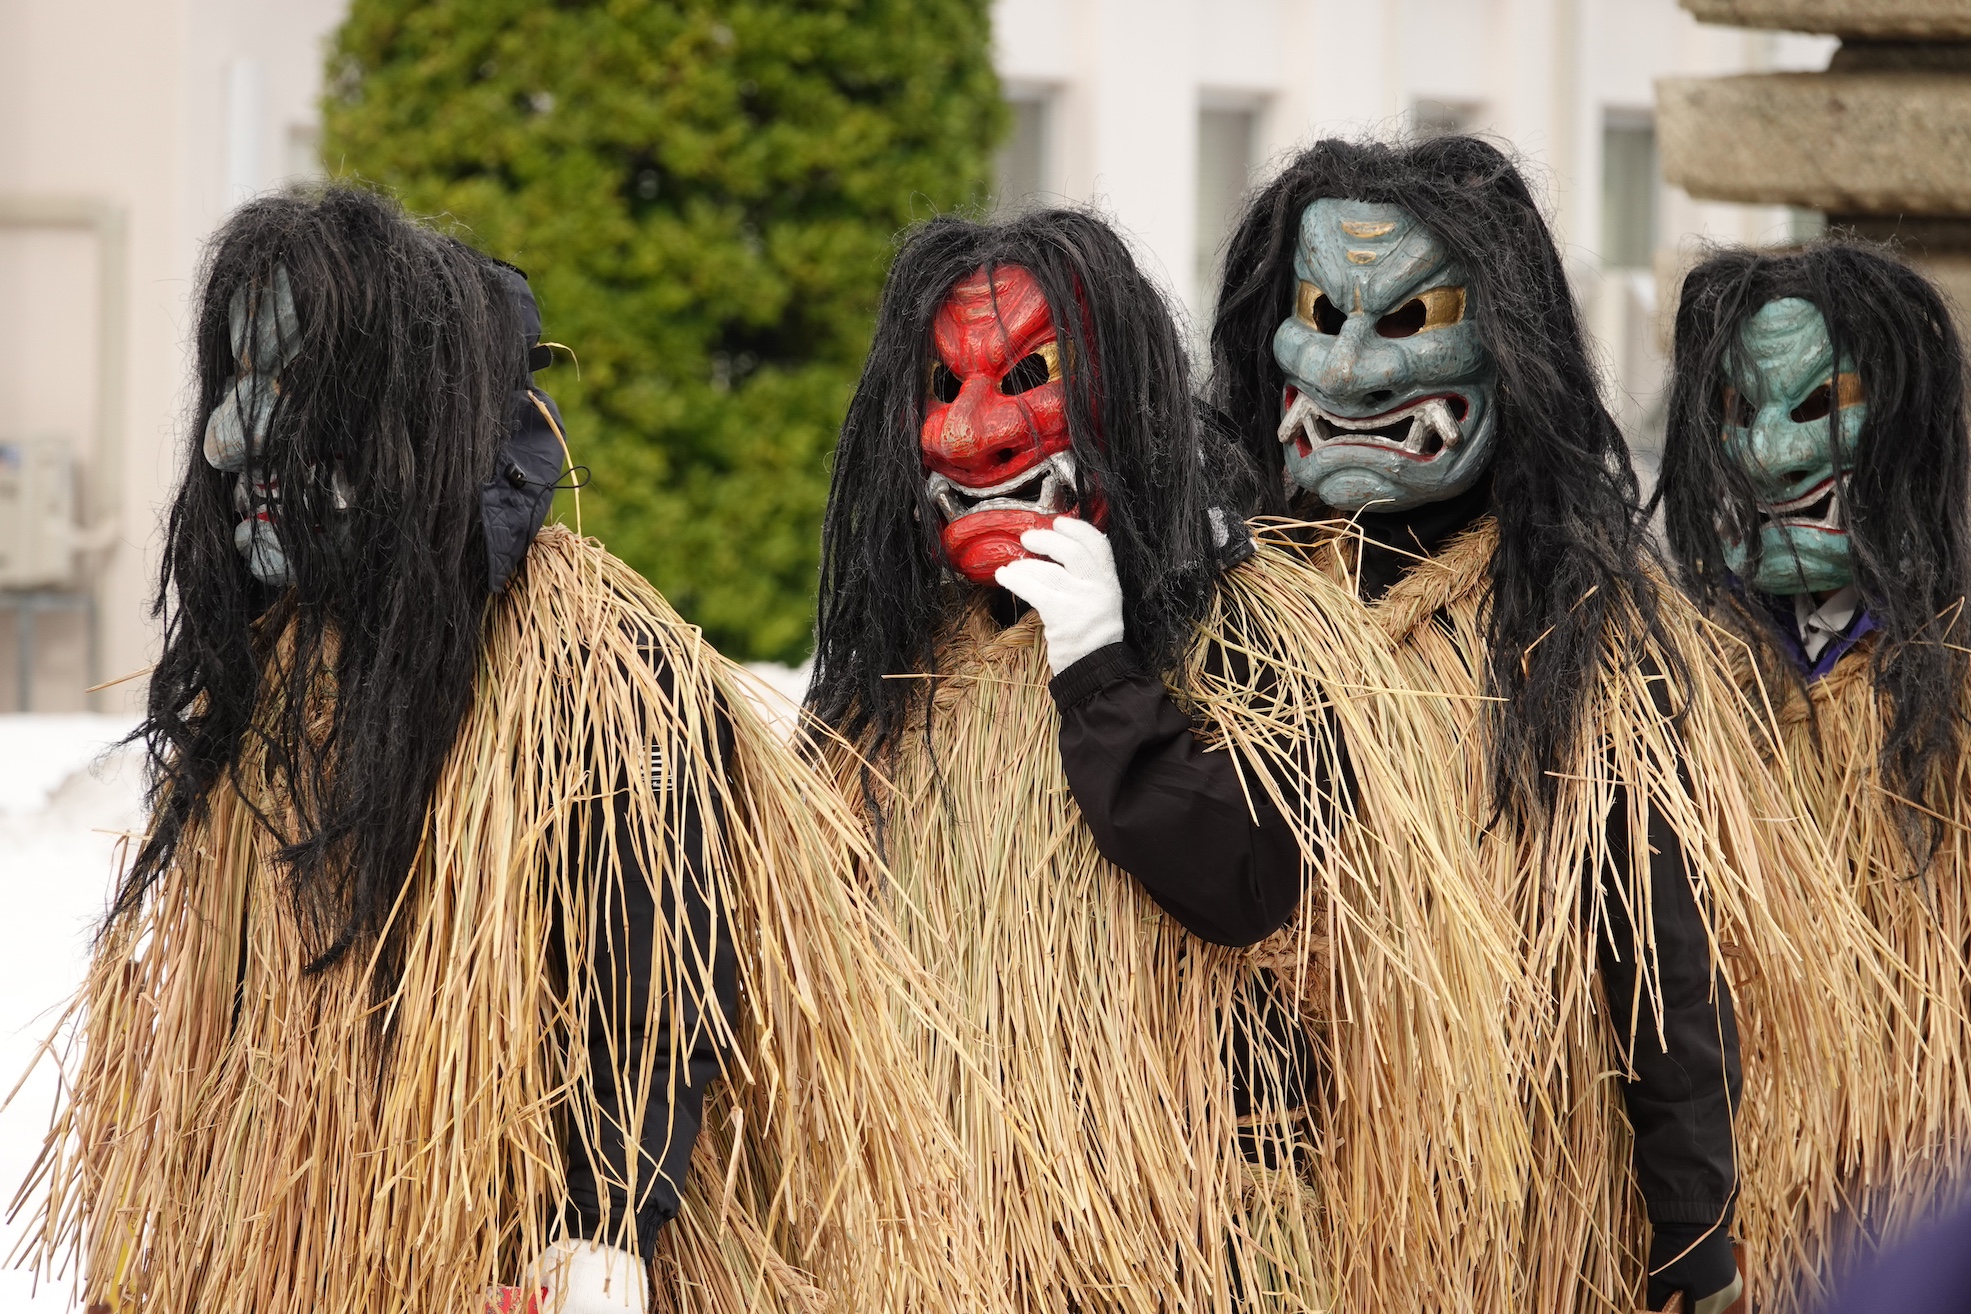 Four young men in Namahage masks walking--three have green masks, one has a red mask.